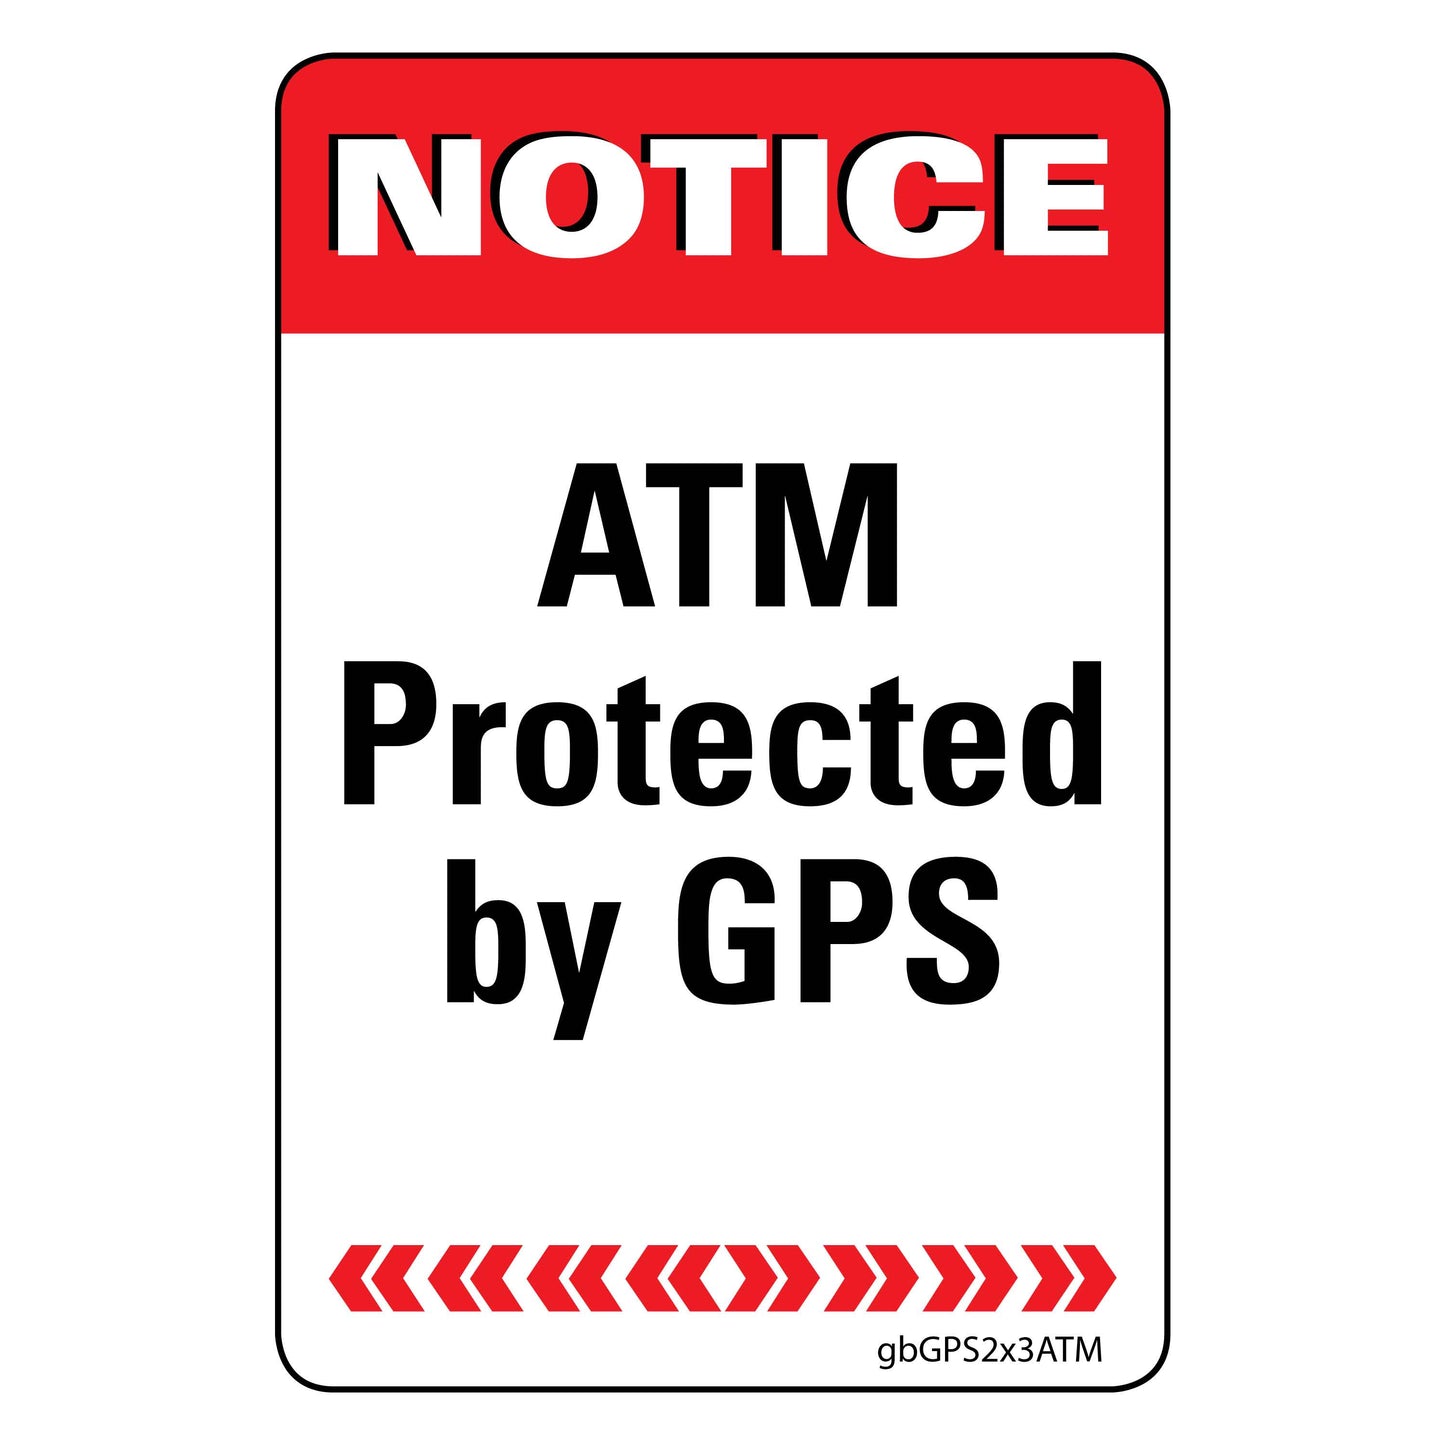 ATM Protected by GPS Decal, Red. 2 inches by 3 inches in size. 